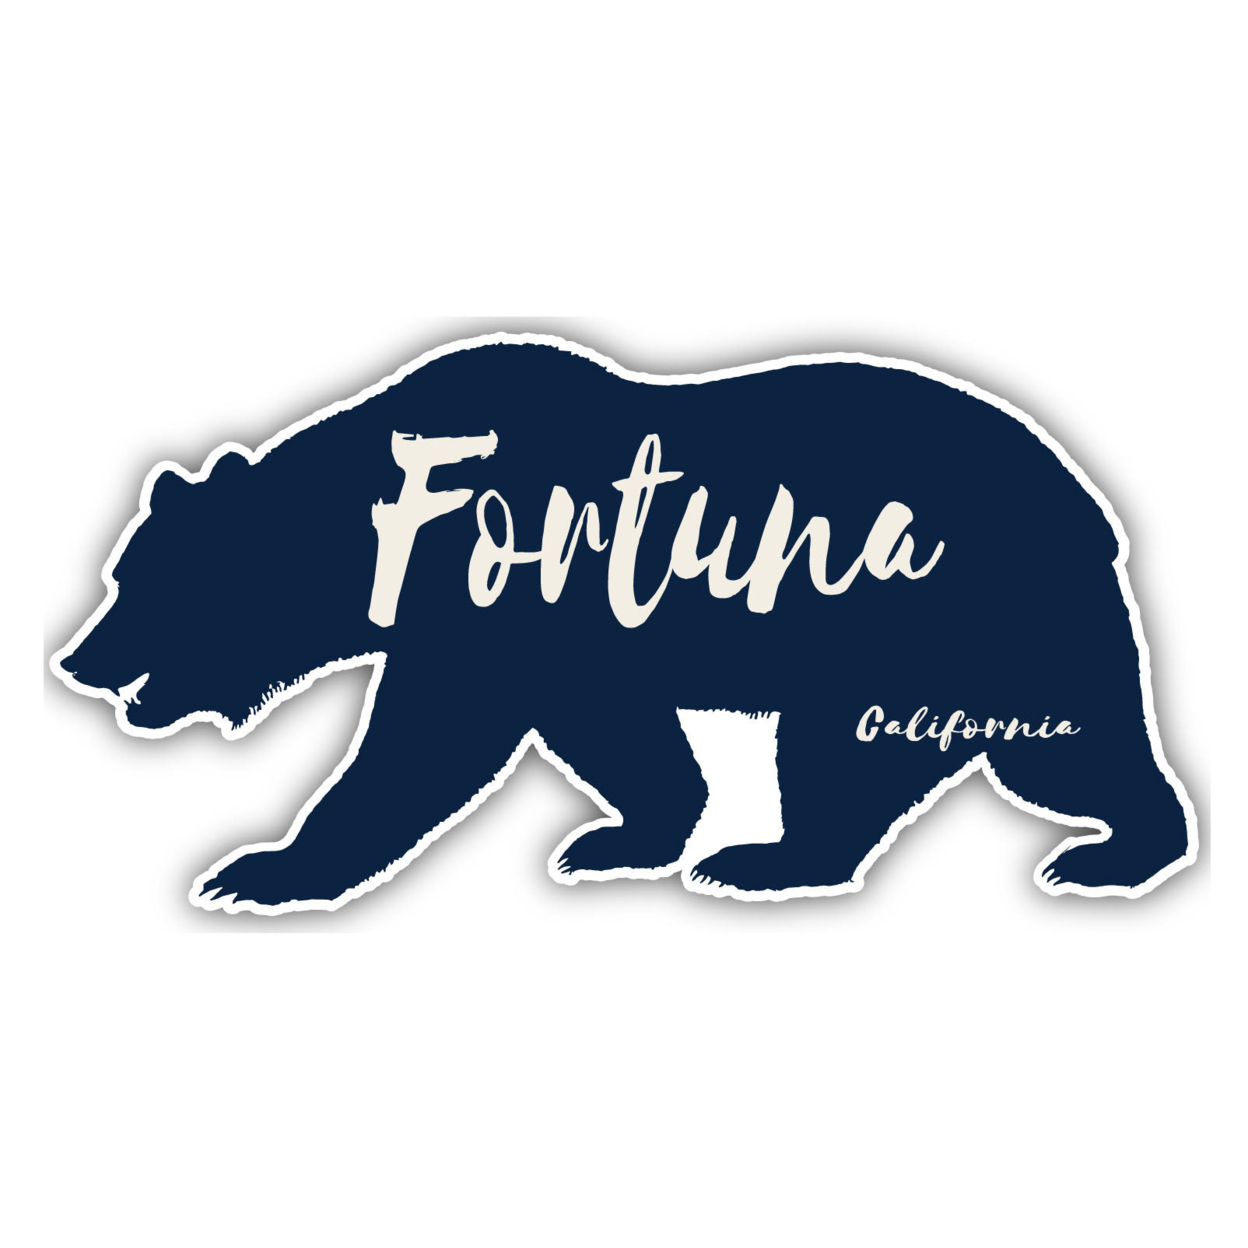 Fortuna California Souvenir Decorative Stickers (Choose Theme And Size) - 4-Pack, 8-Inch, Camp Life